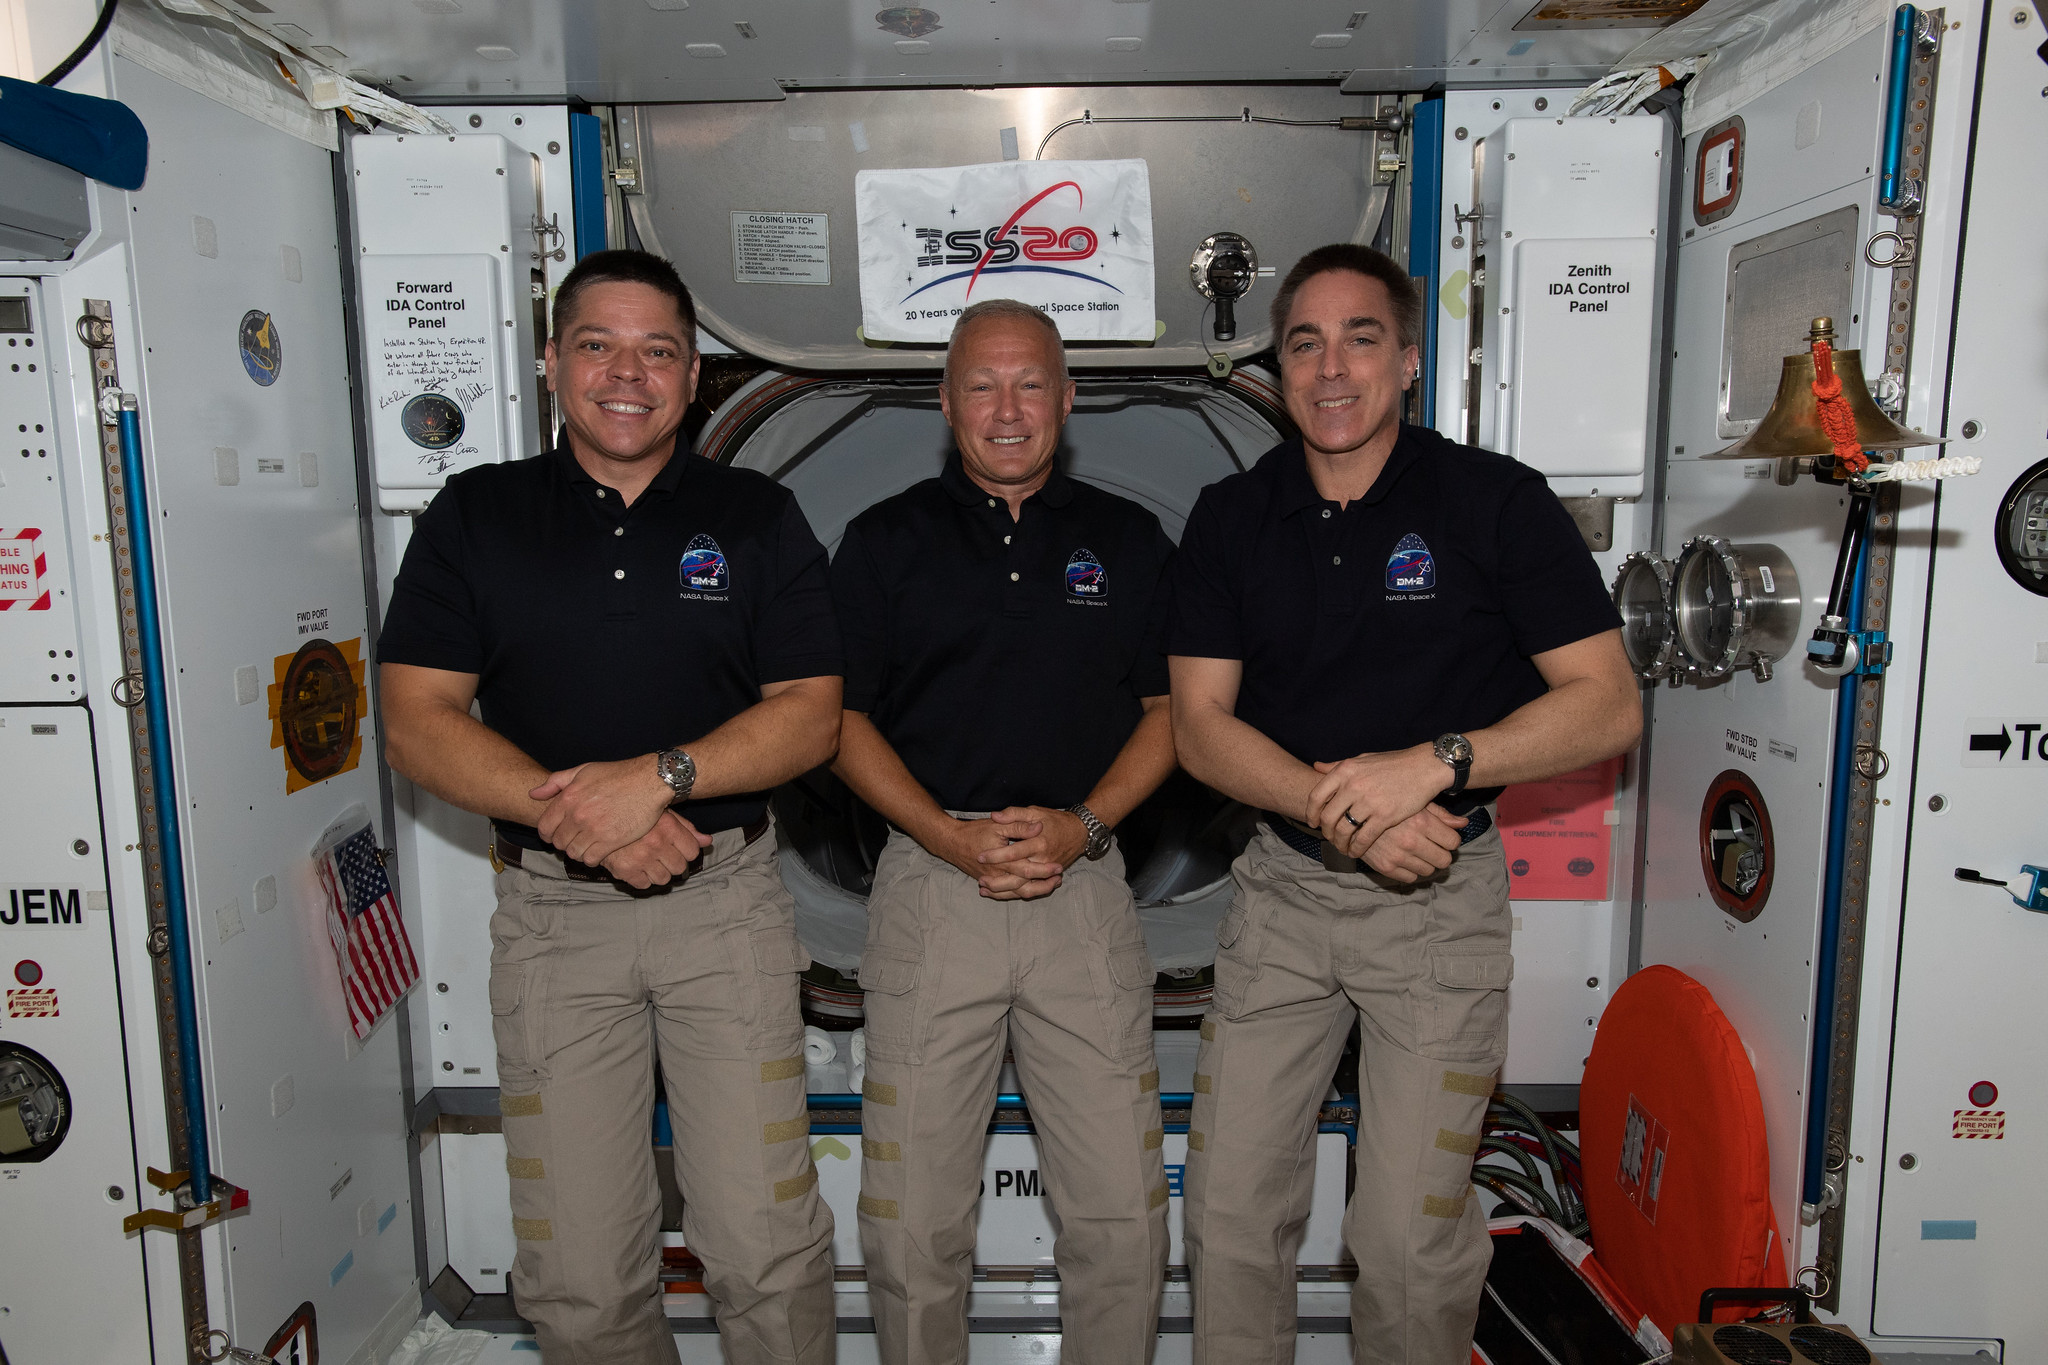 NASA astronauts (from left) Bob Behnken, Doug Hurley and Chris Cassidy are the U.S. members of the Expedition 63 crew